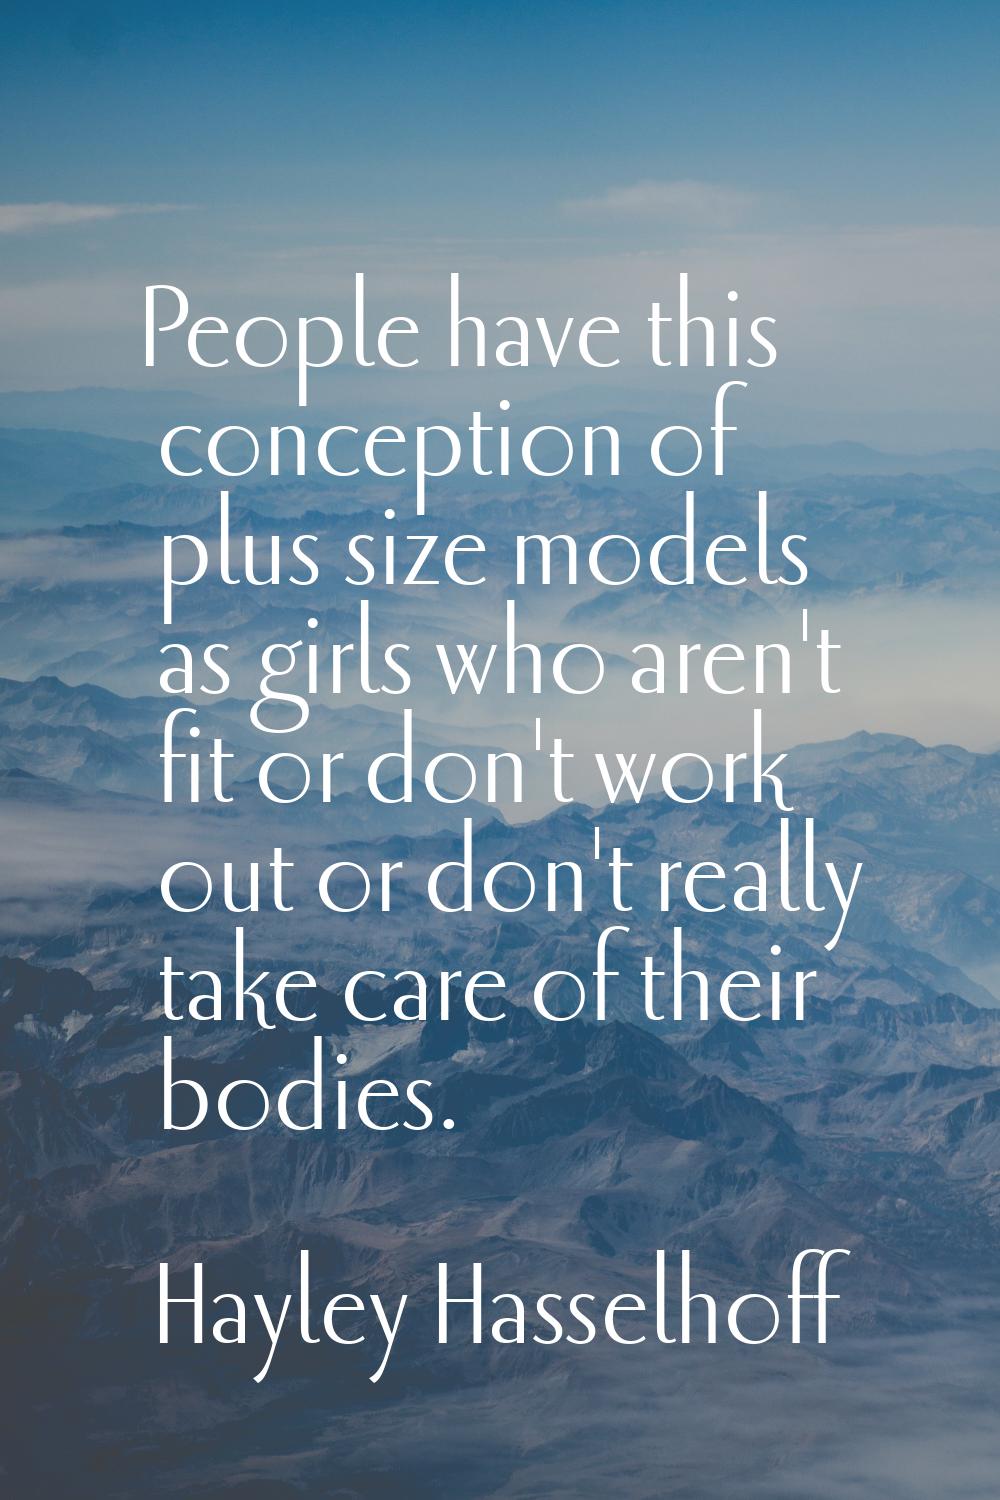 People have this conception of plus size models as girls who aren't fit or don't work out or don't 